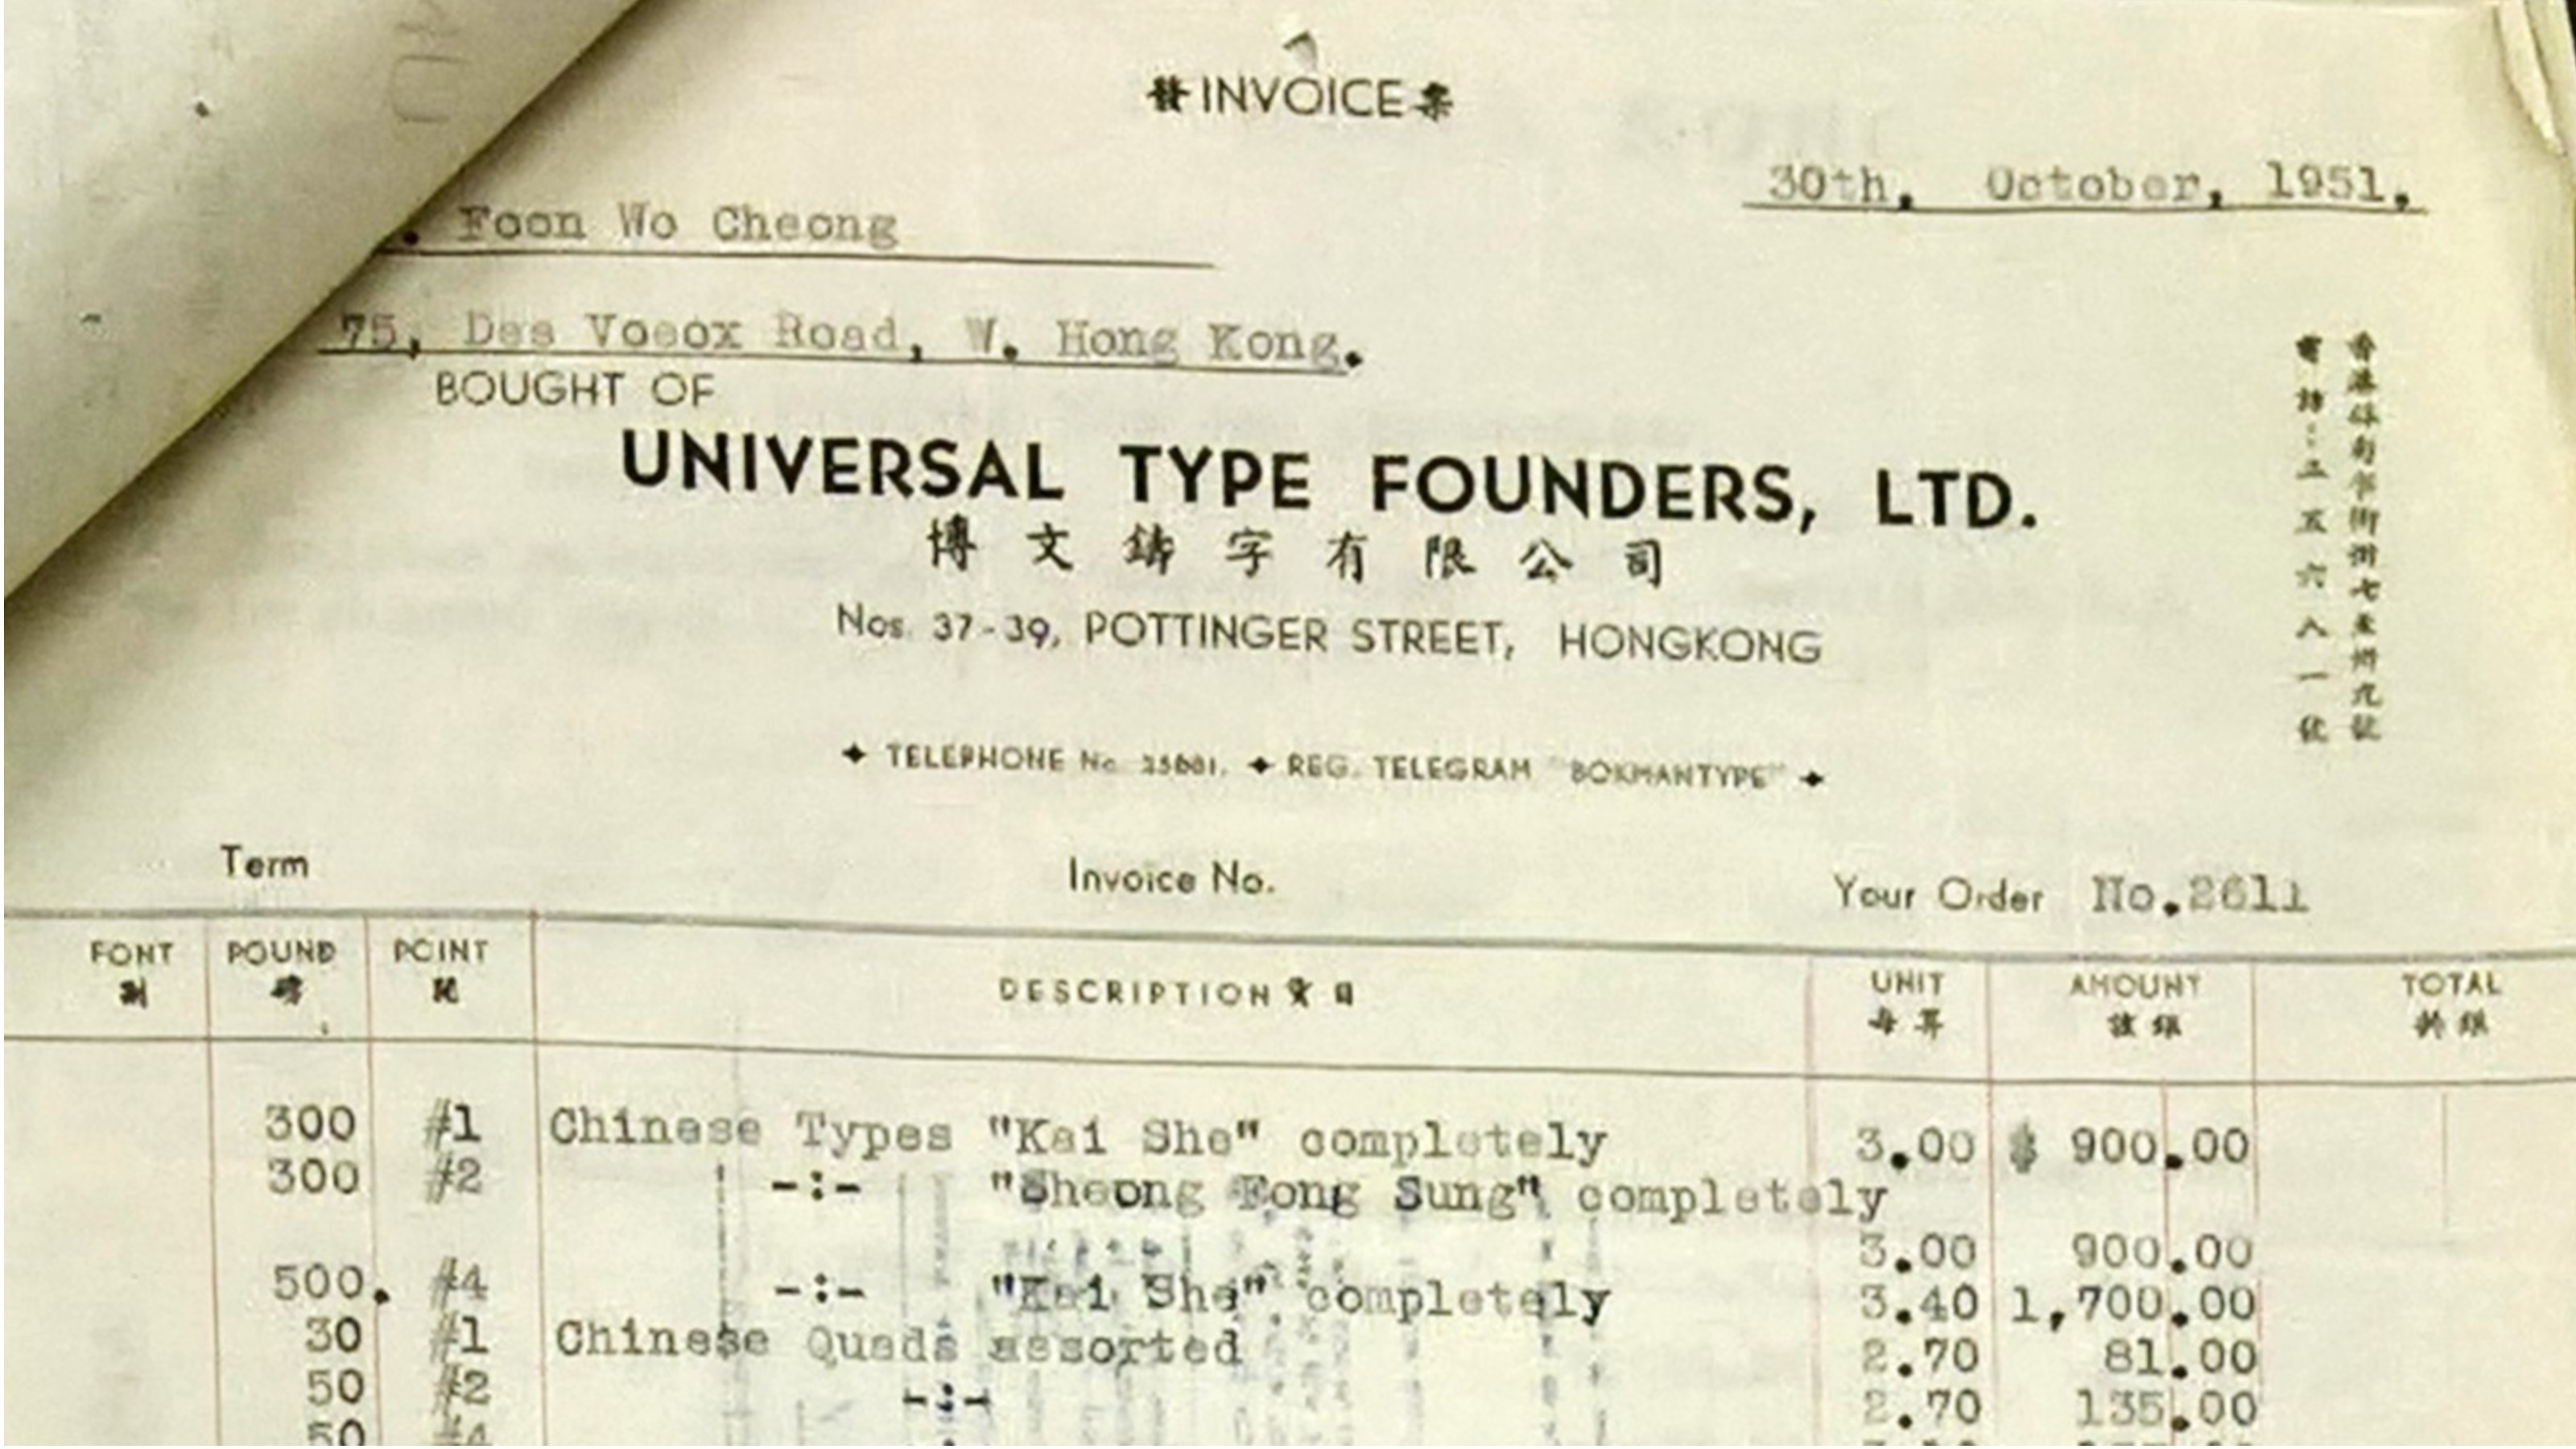 detail of invoice showing Universal Type Founders letterhead